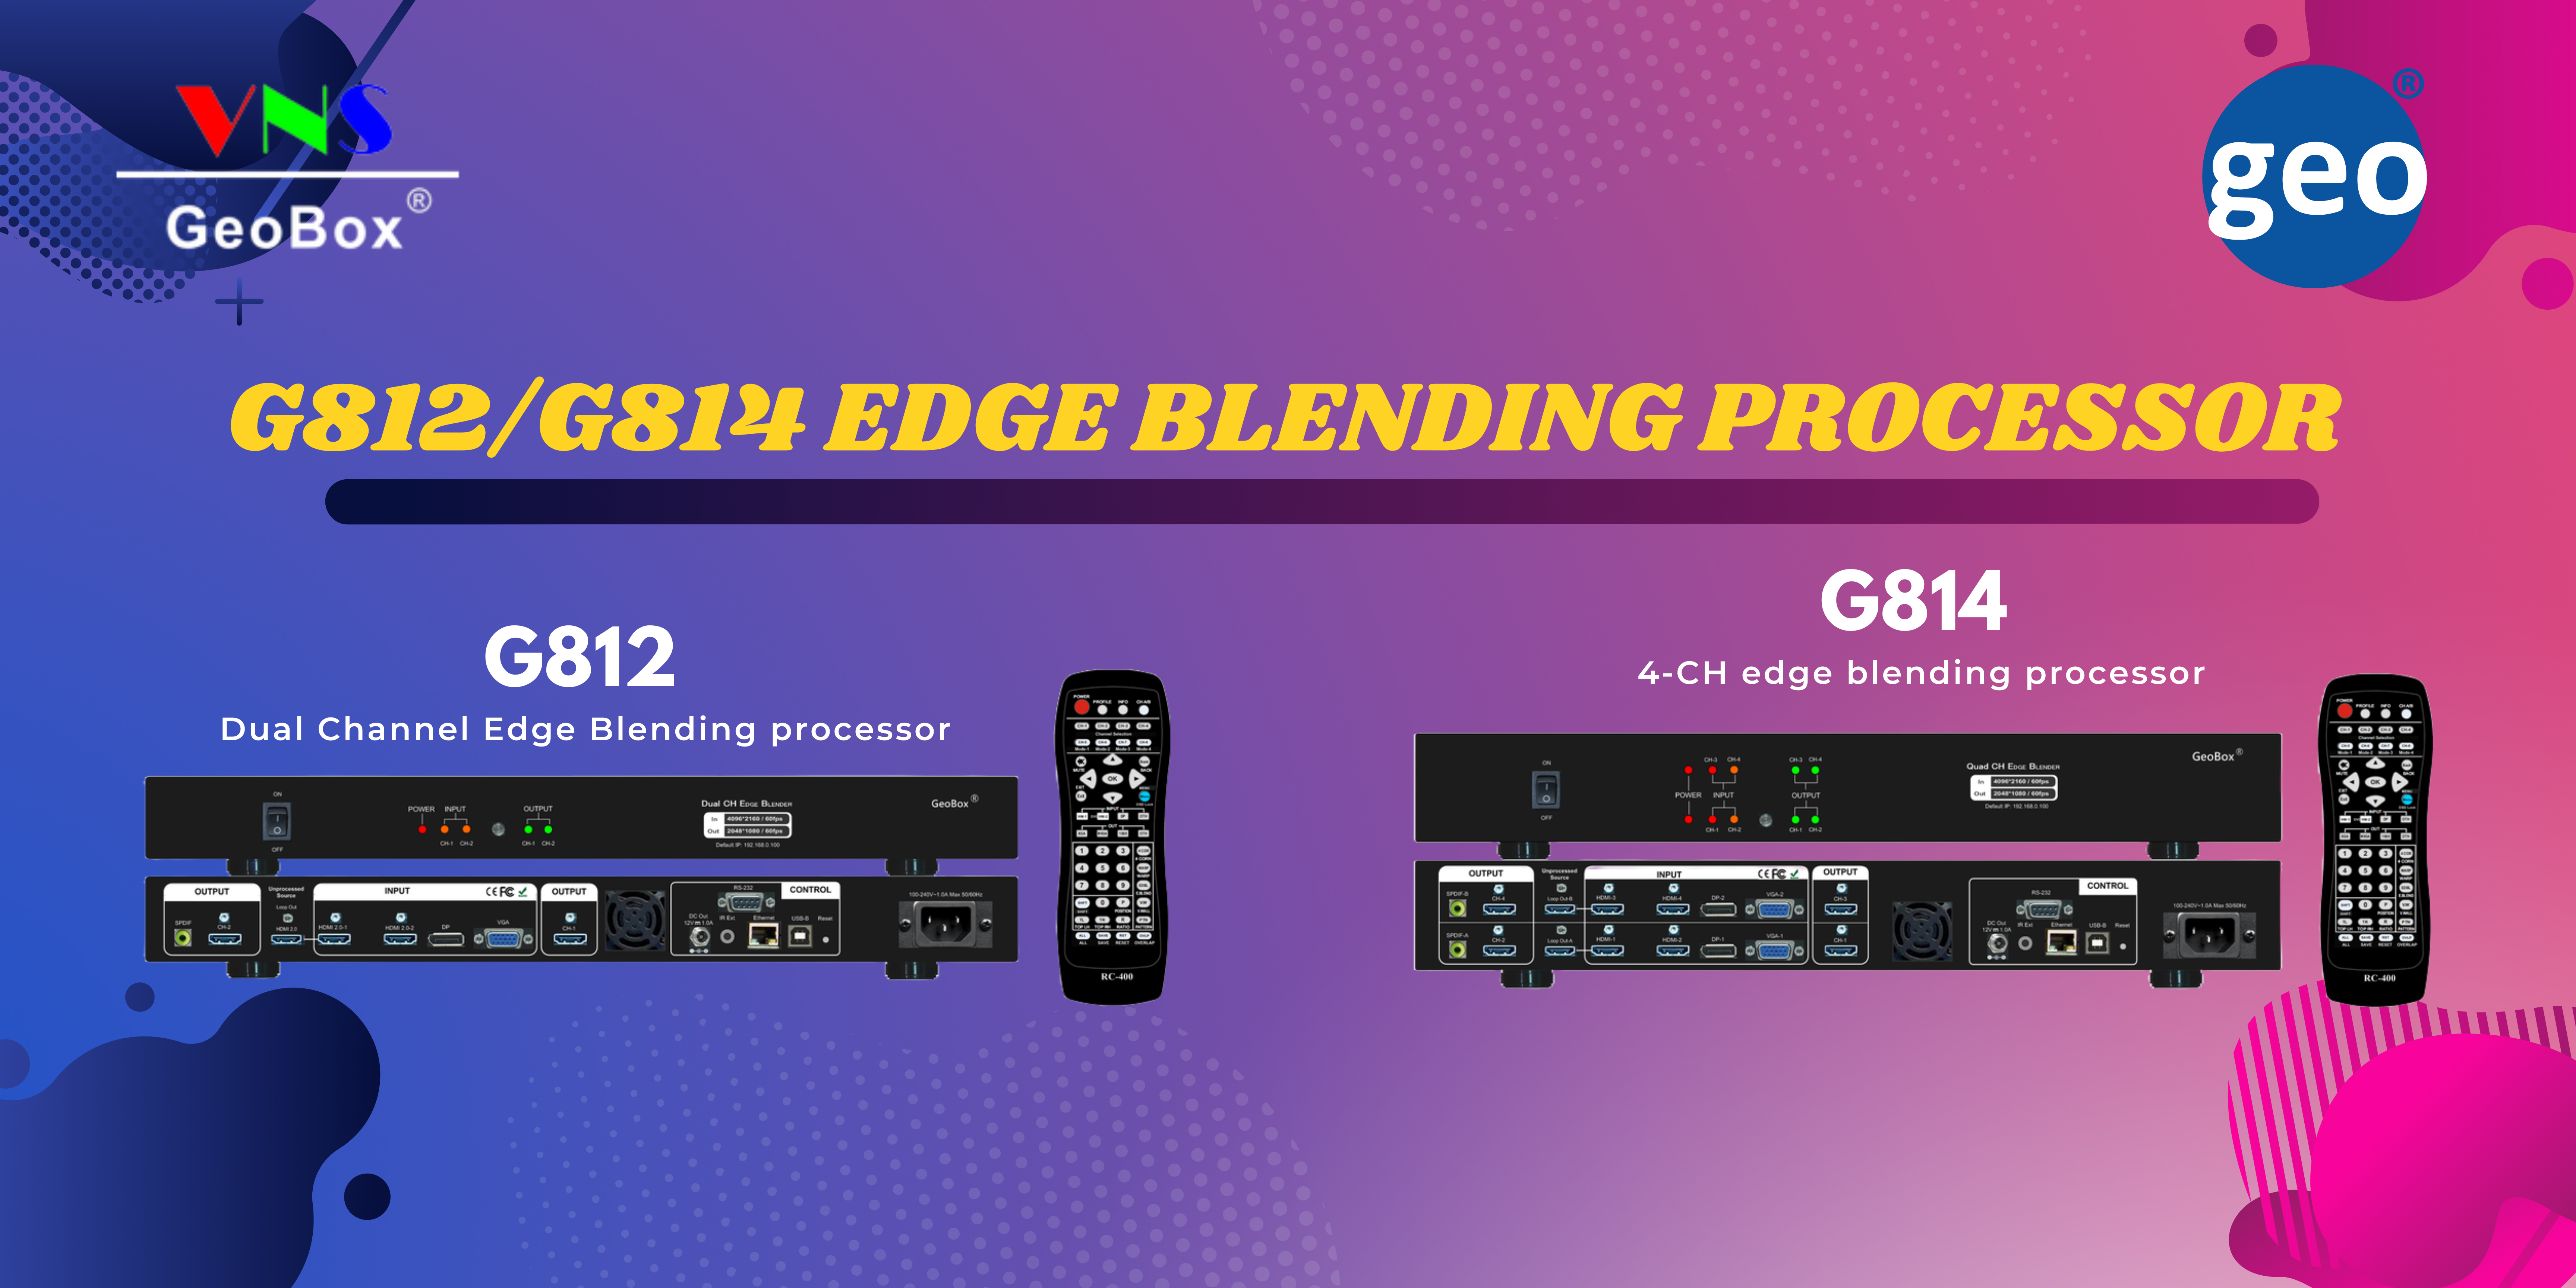 Geobox: G812/G814 Edge Blending Processor the Dual and Quad-Channel Solutions